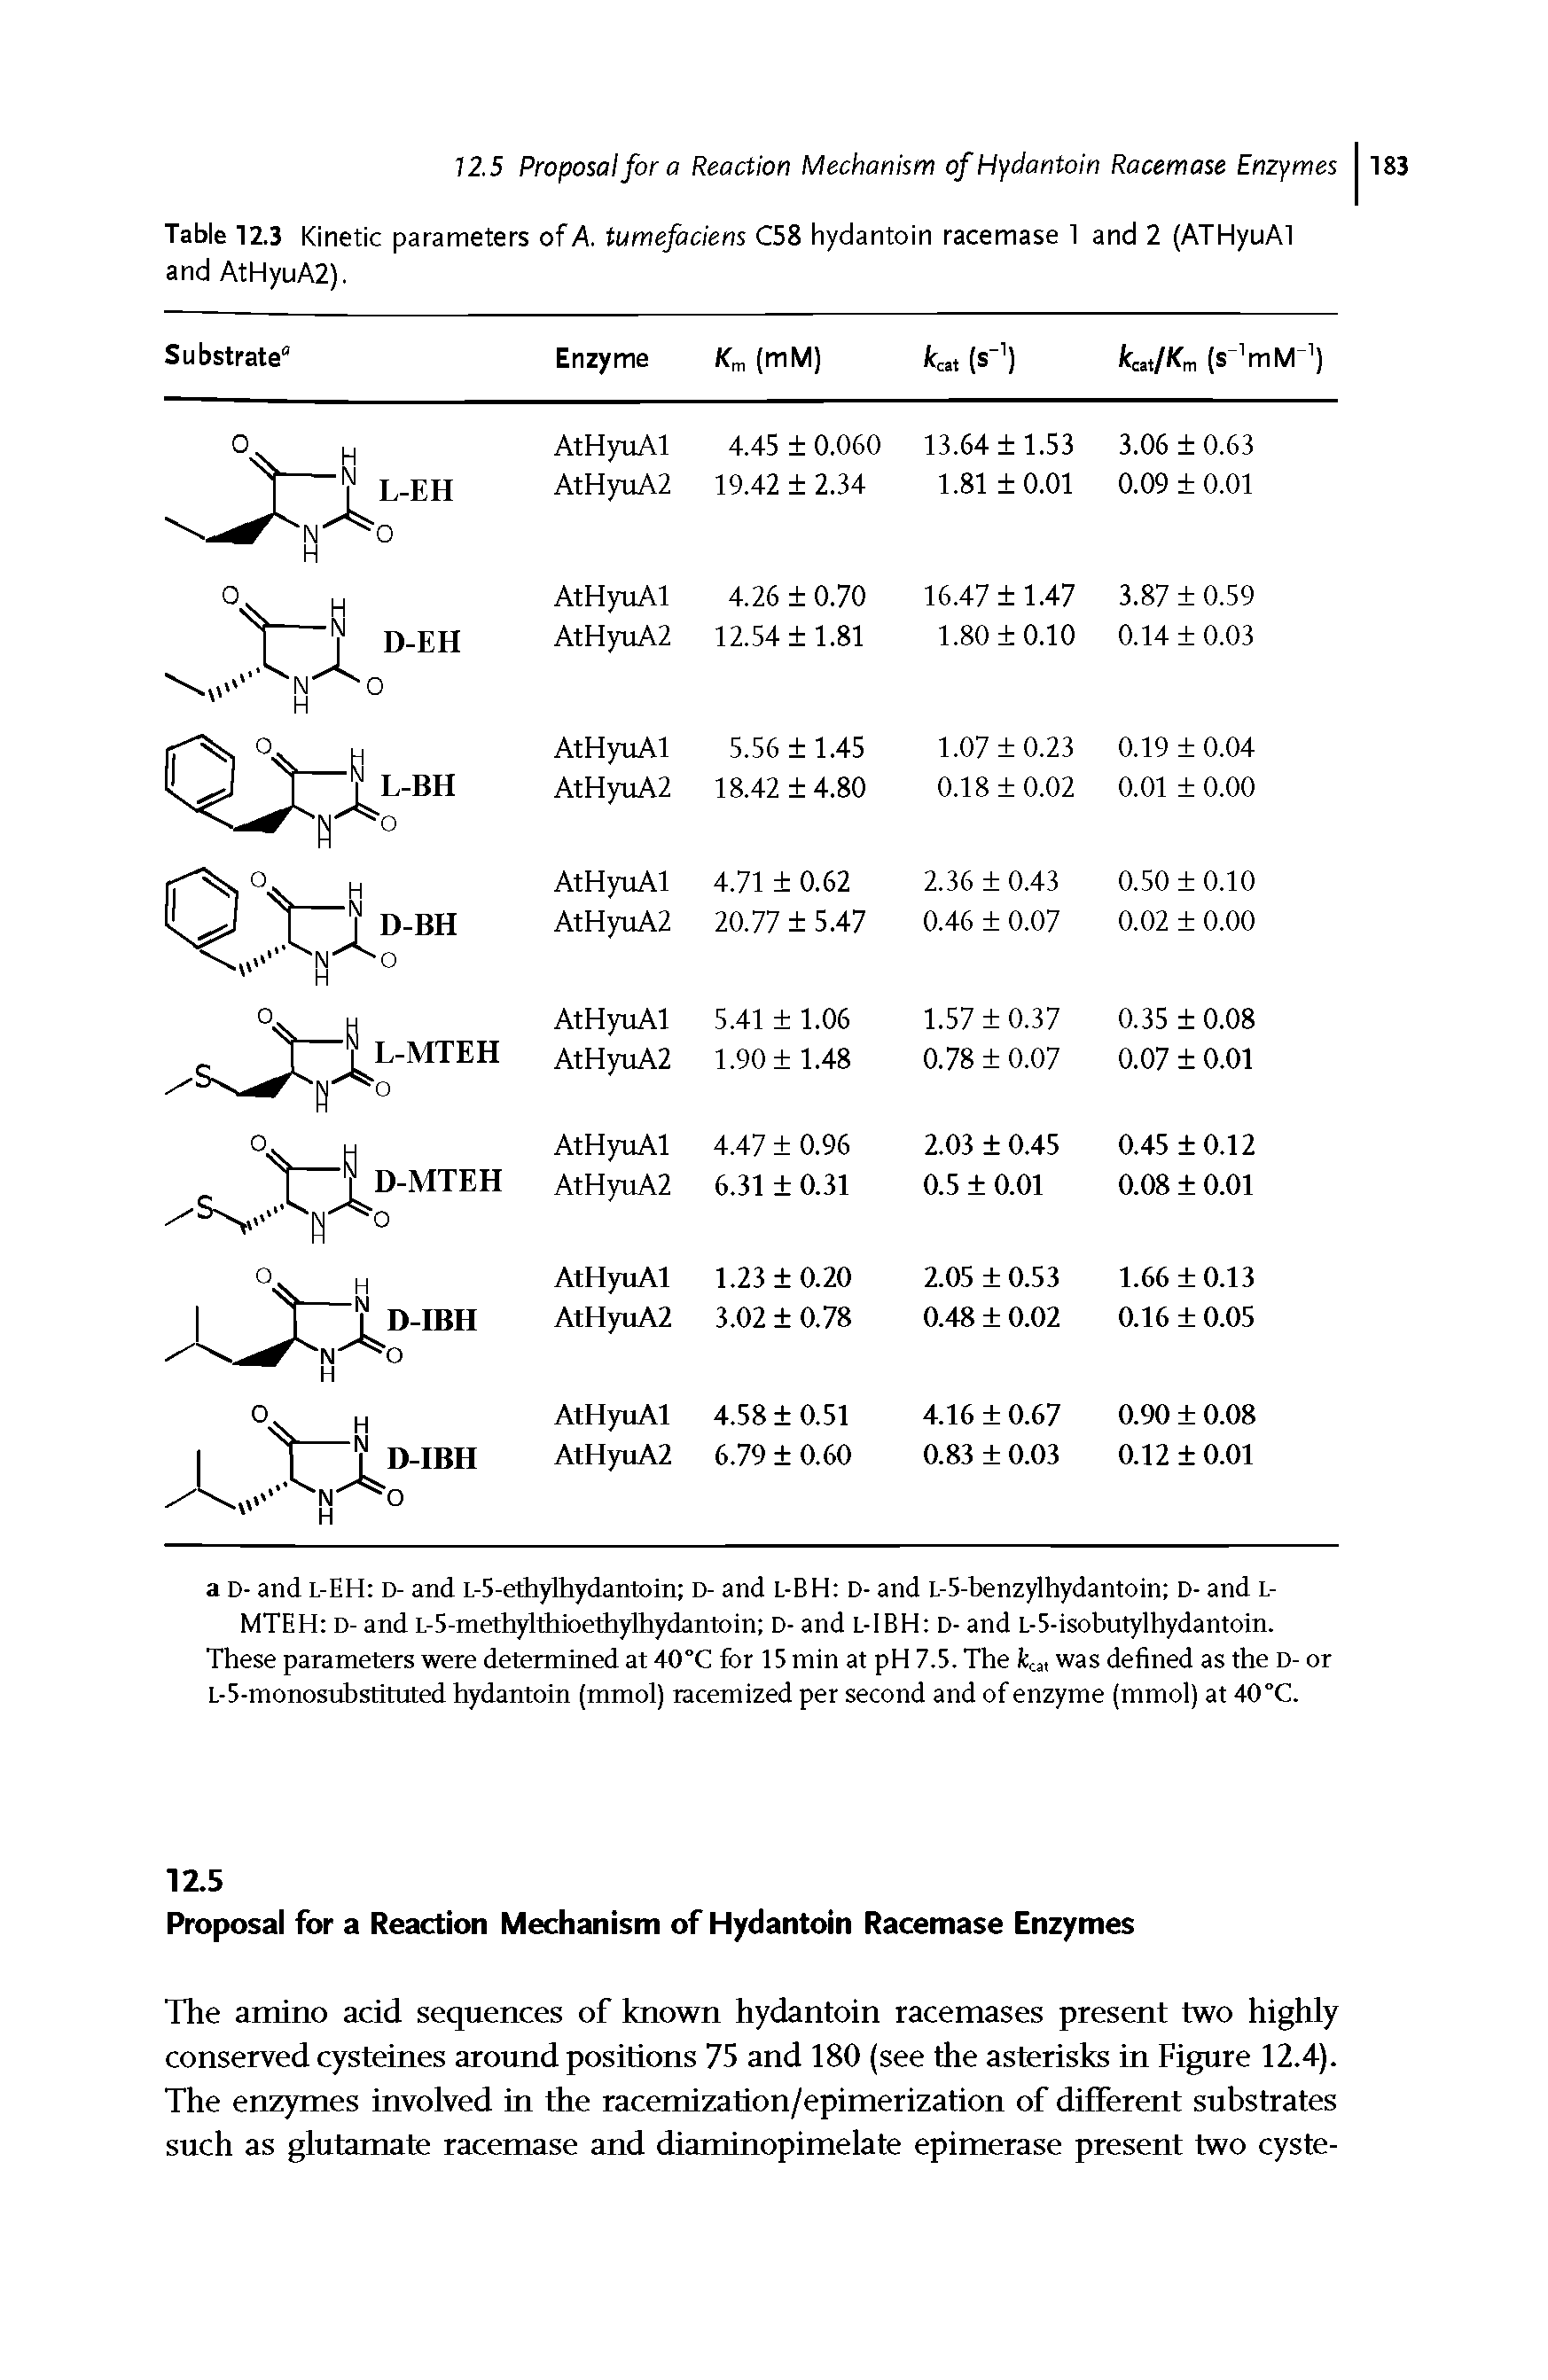 Table 1Z3 Kinetic parameters of A. tumefaciens C58 hydantoin racemase 1 and 2 (ATHyuAI and AtHyuA2).